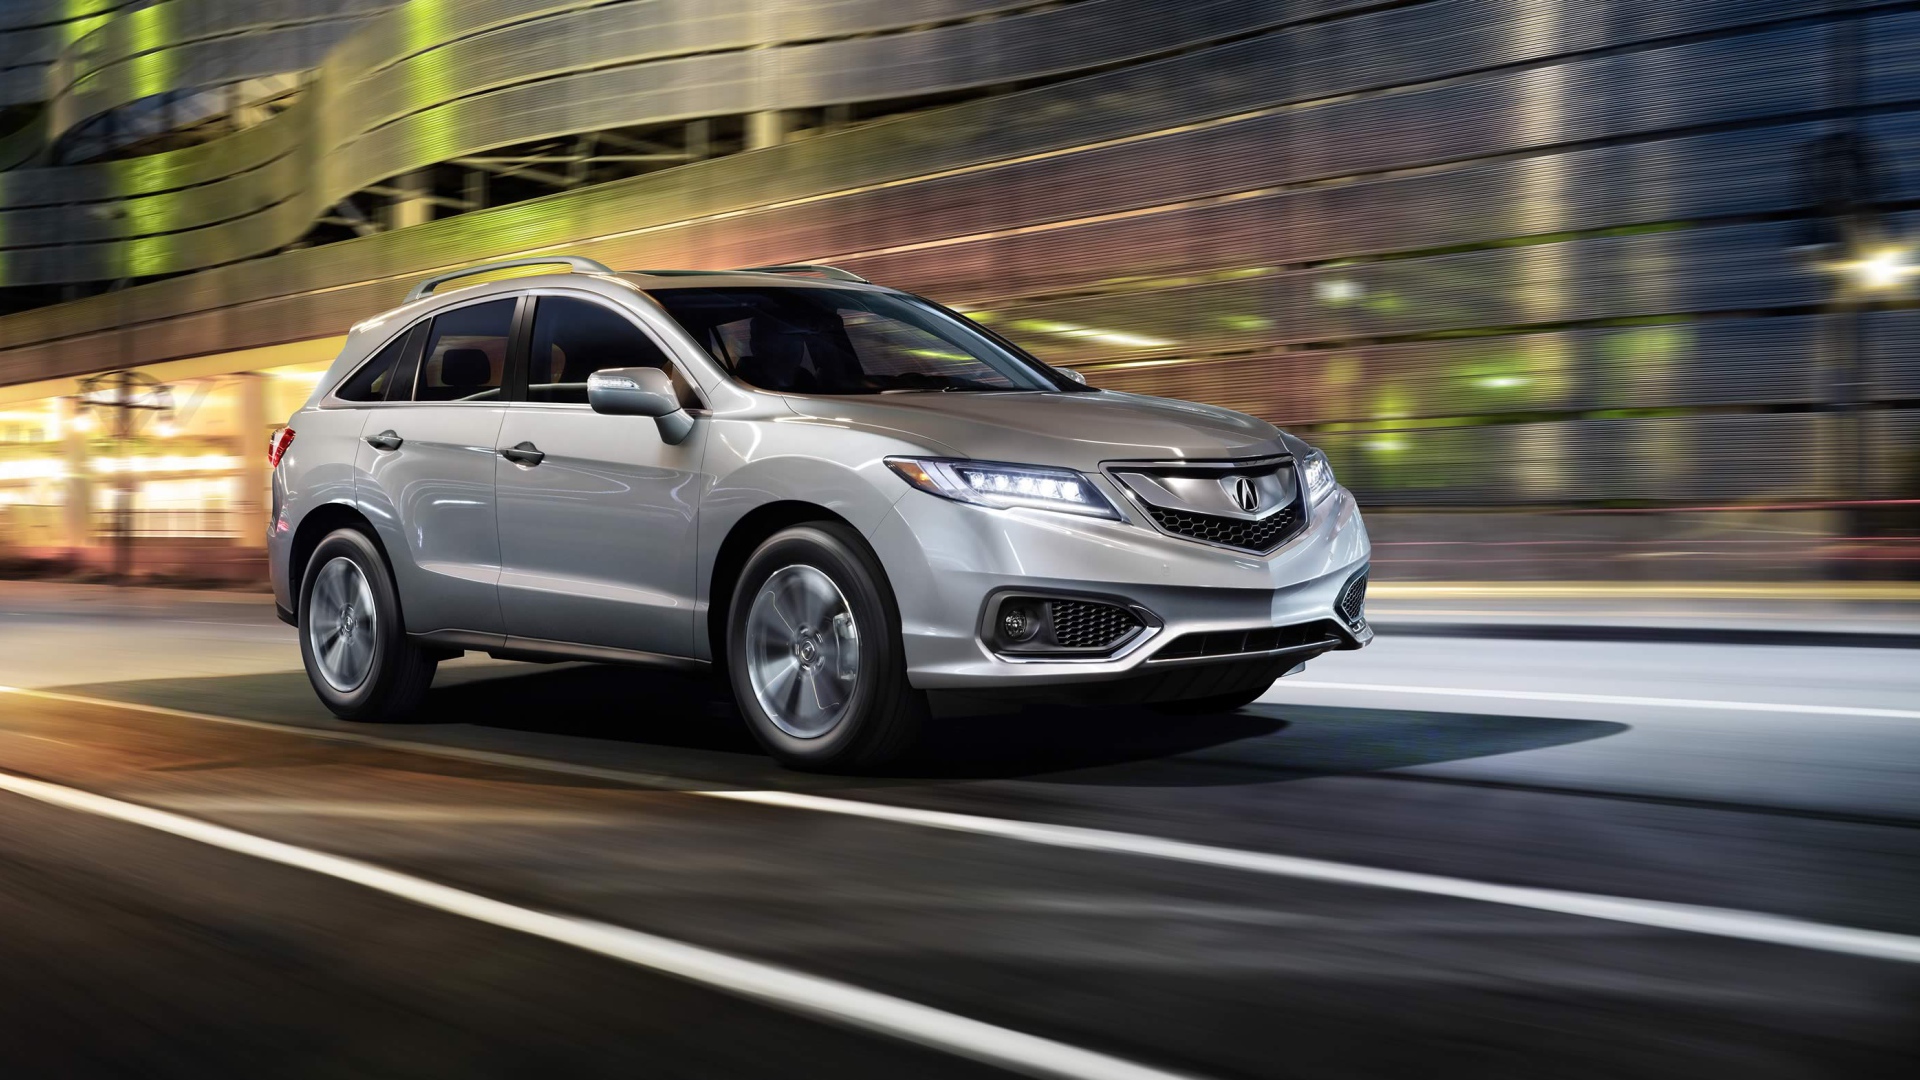 Silver SUV Acura RDX, 2018 at speed